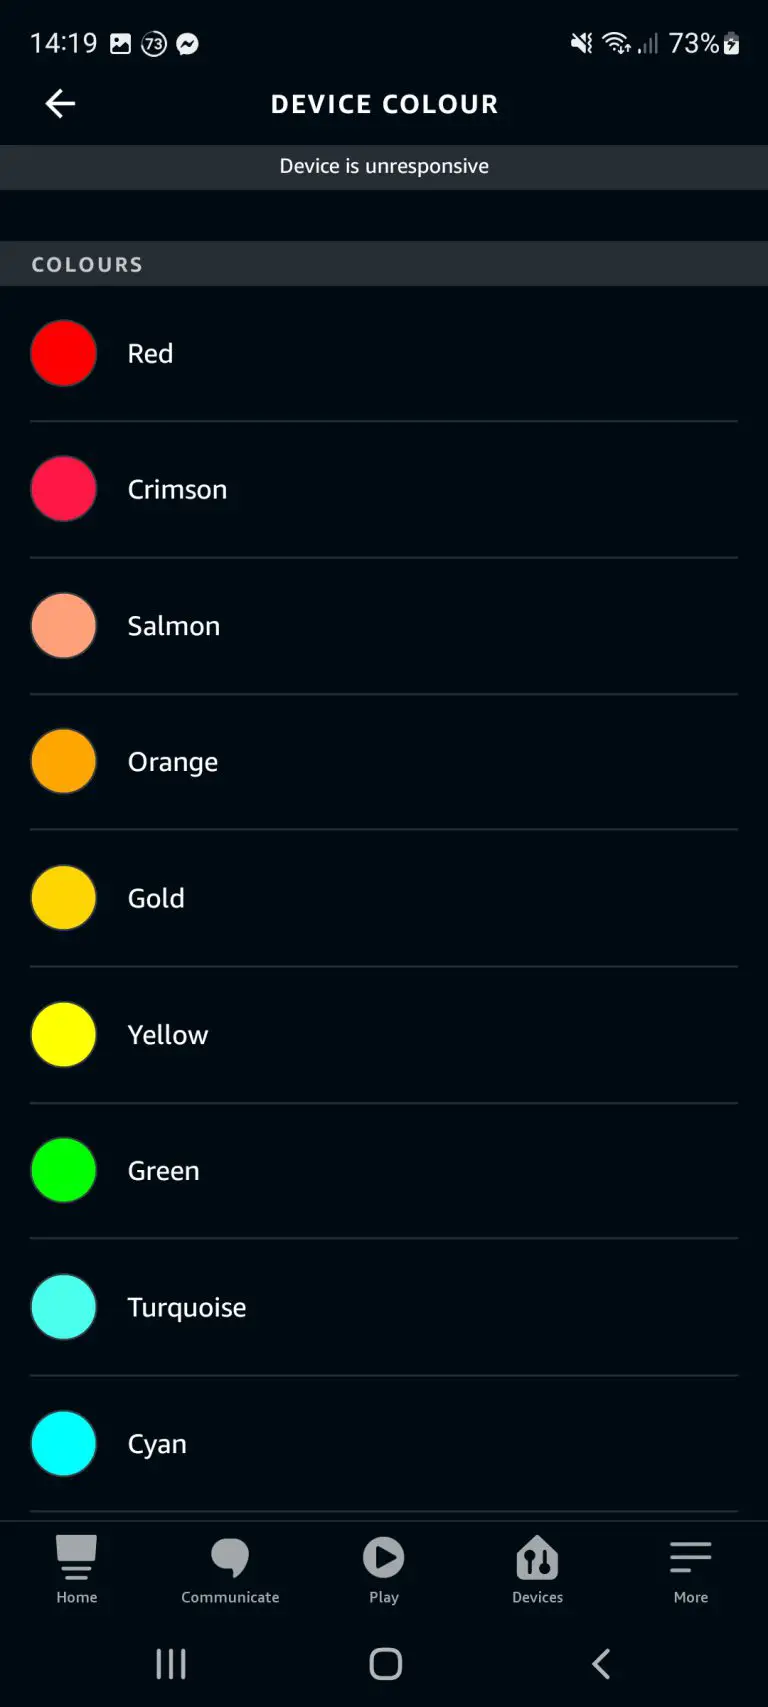 A list of different colors that the Alexa app supports